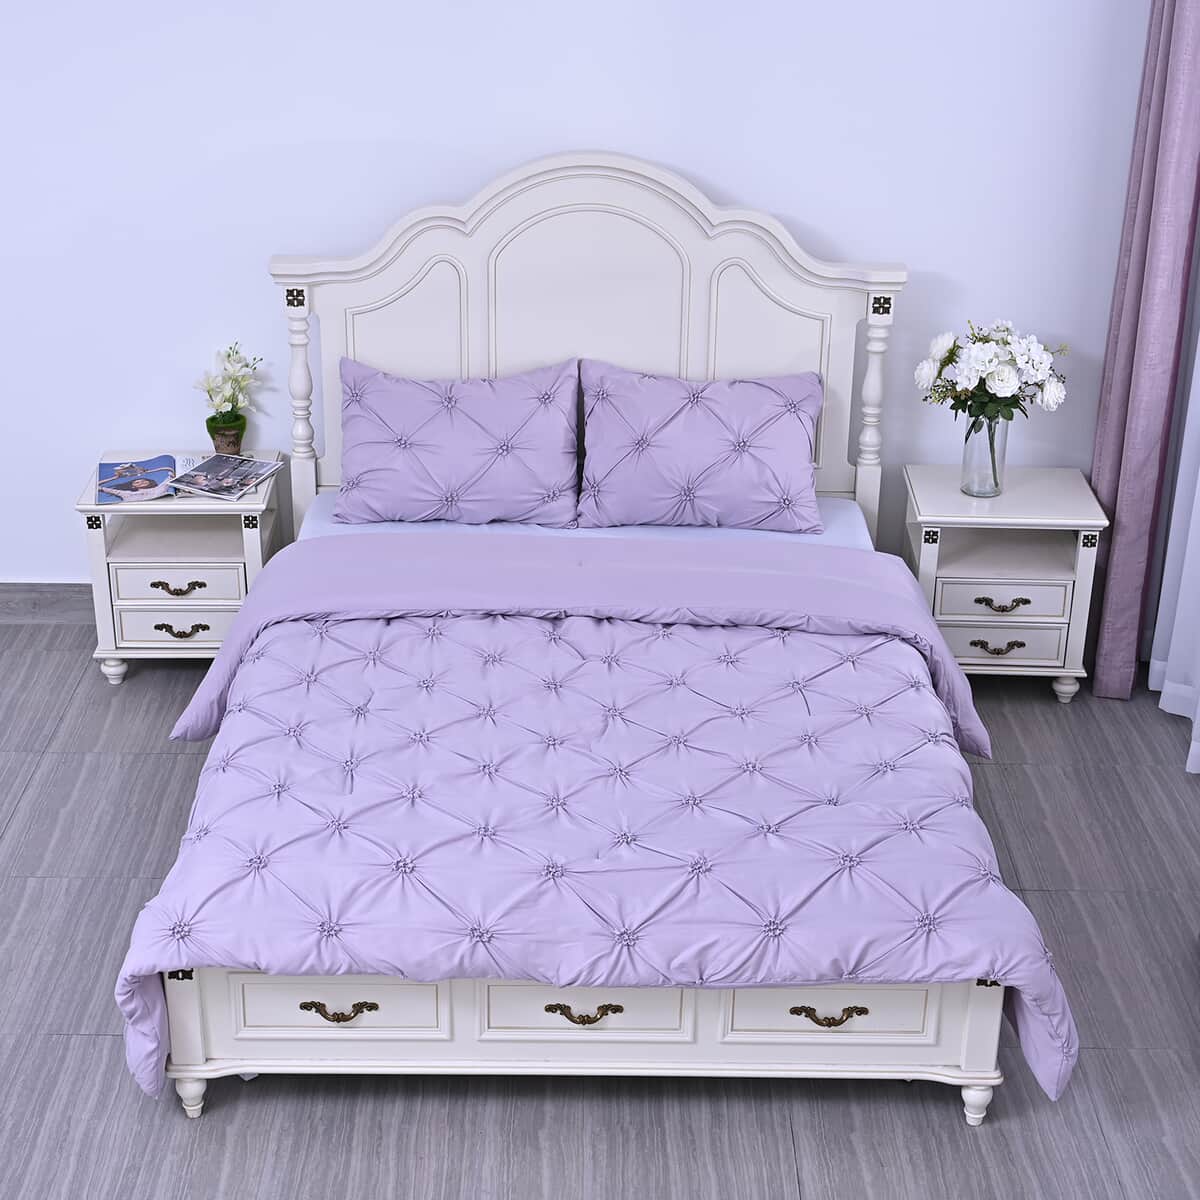 Lilac Diamond Pattern Microfiber Comforter (Queen, 86"x92") with 2 Shams (20"x26") image number 1